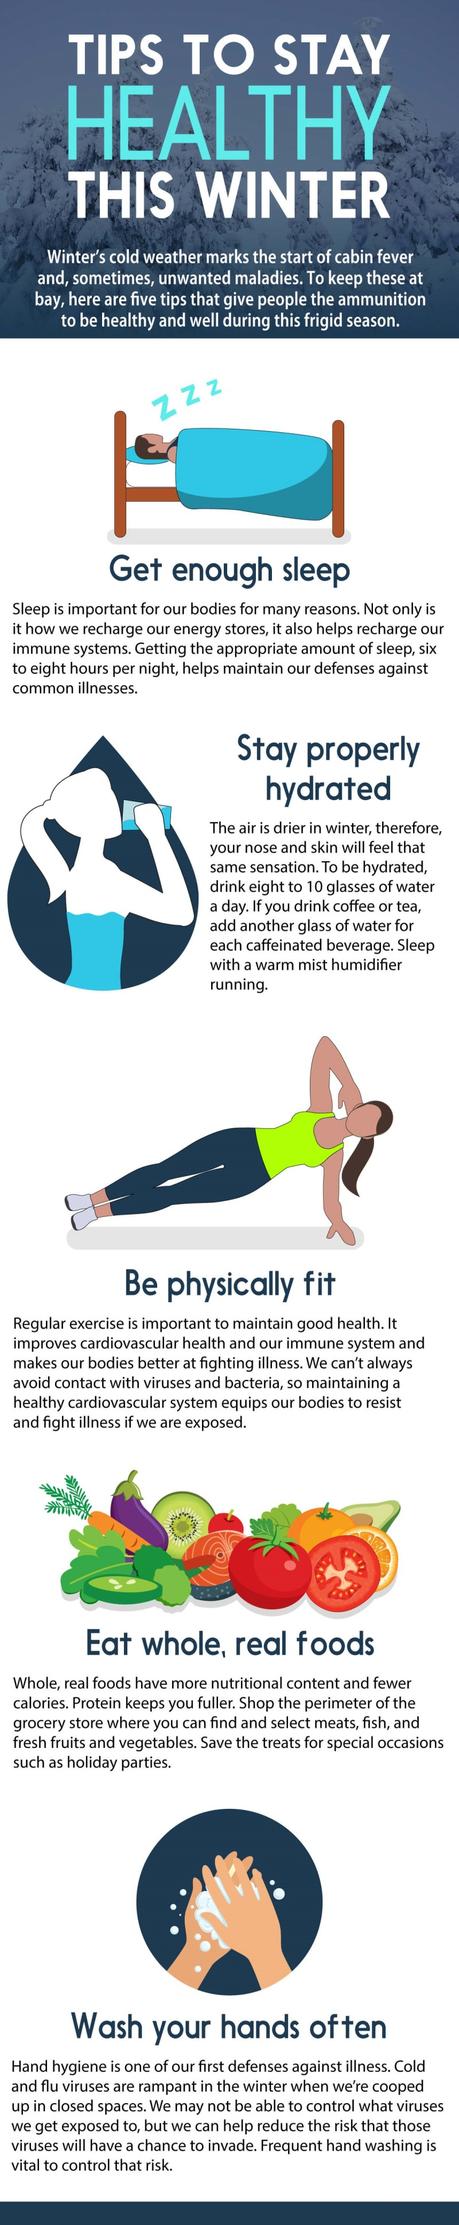 Tips To Stay Healthy In This Winter Season [Infographics]